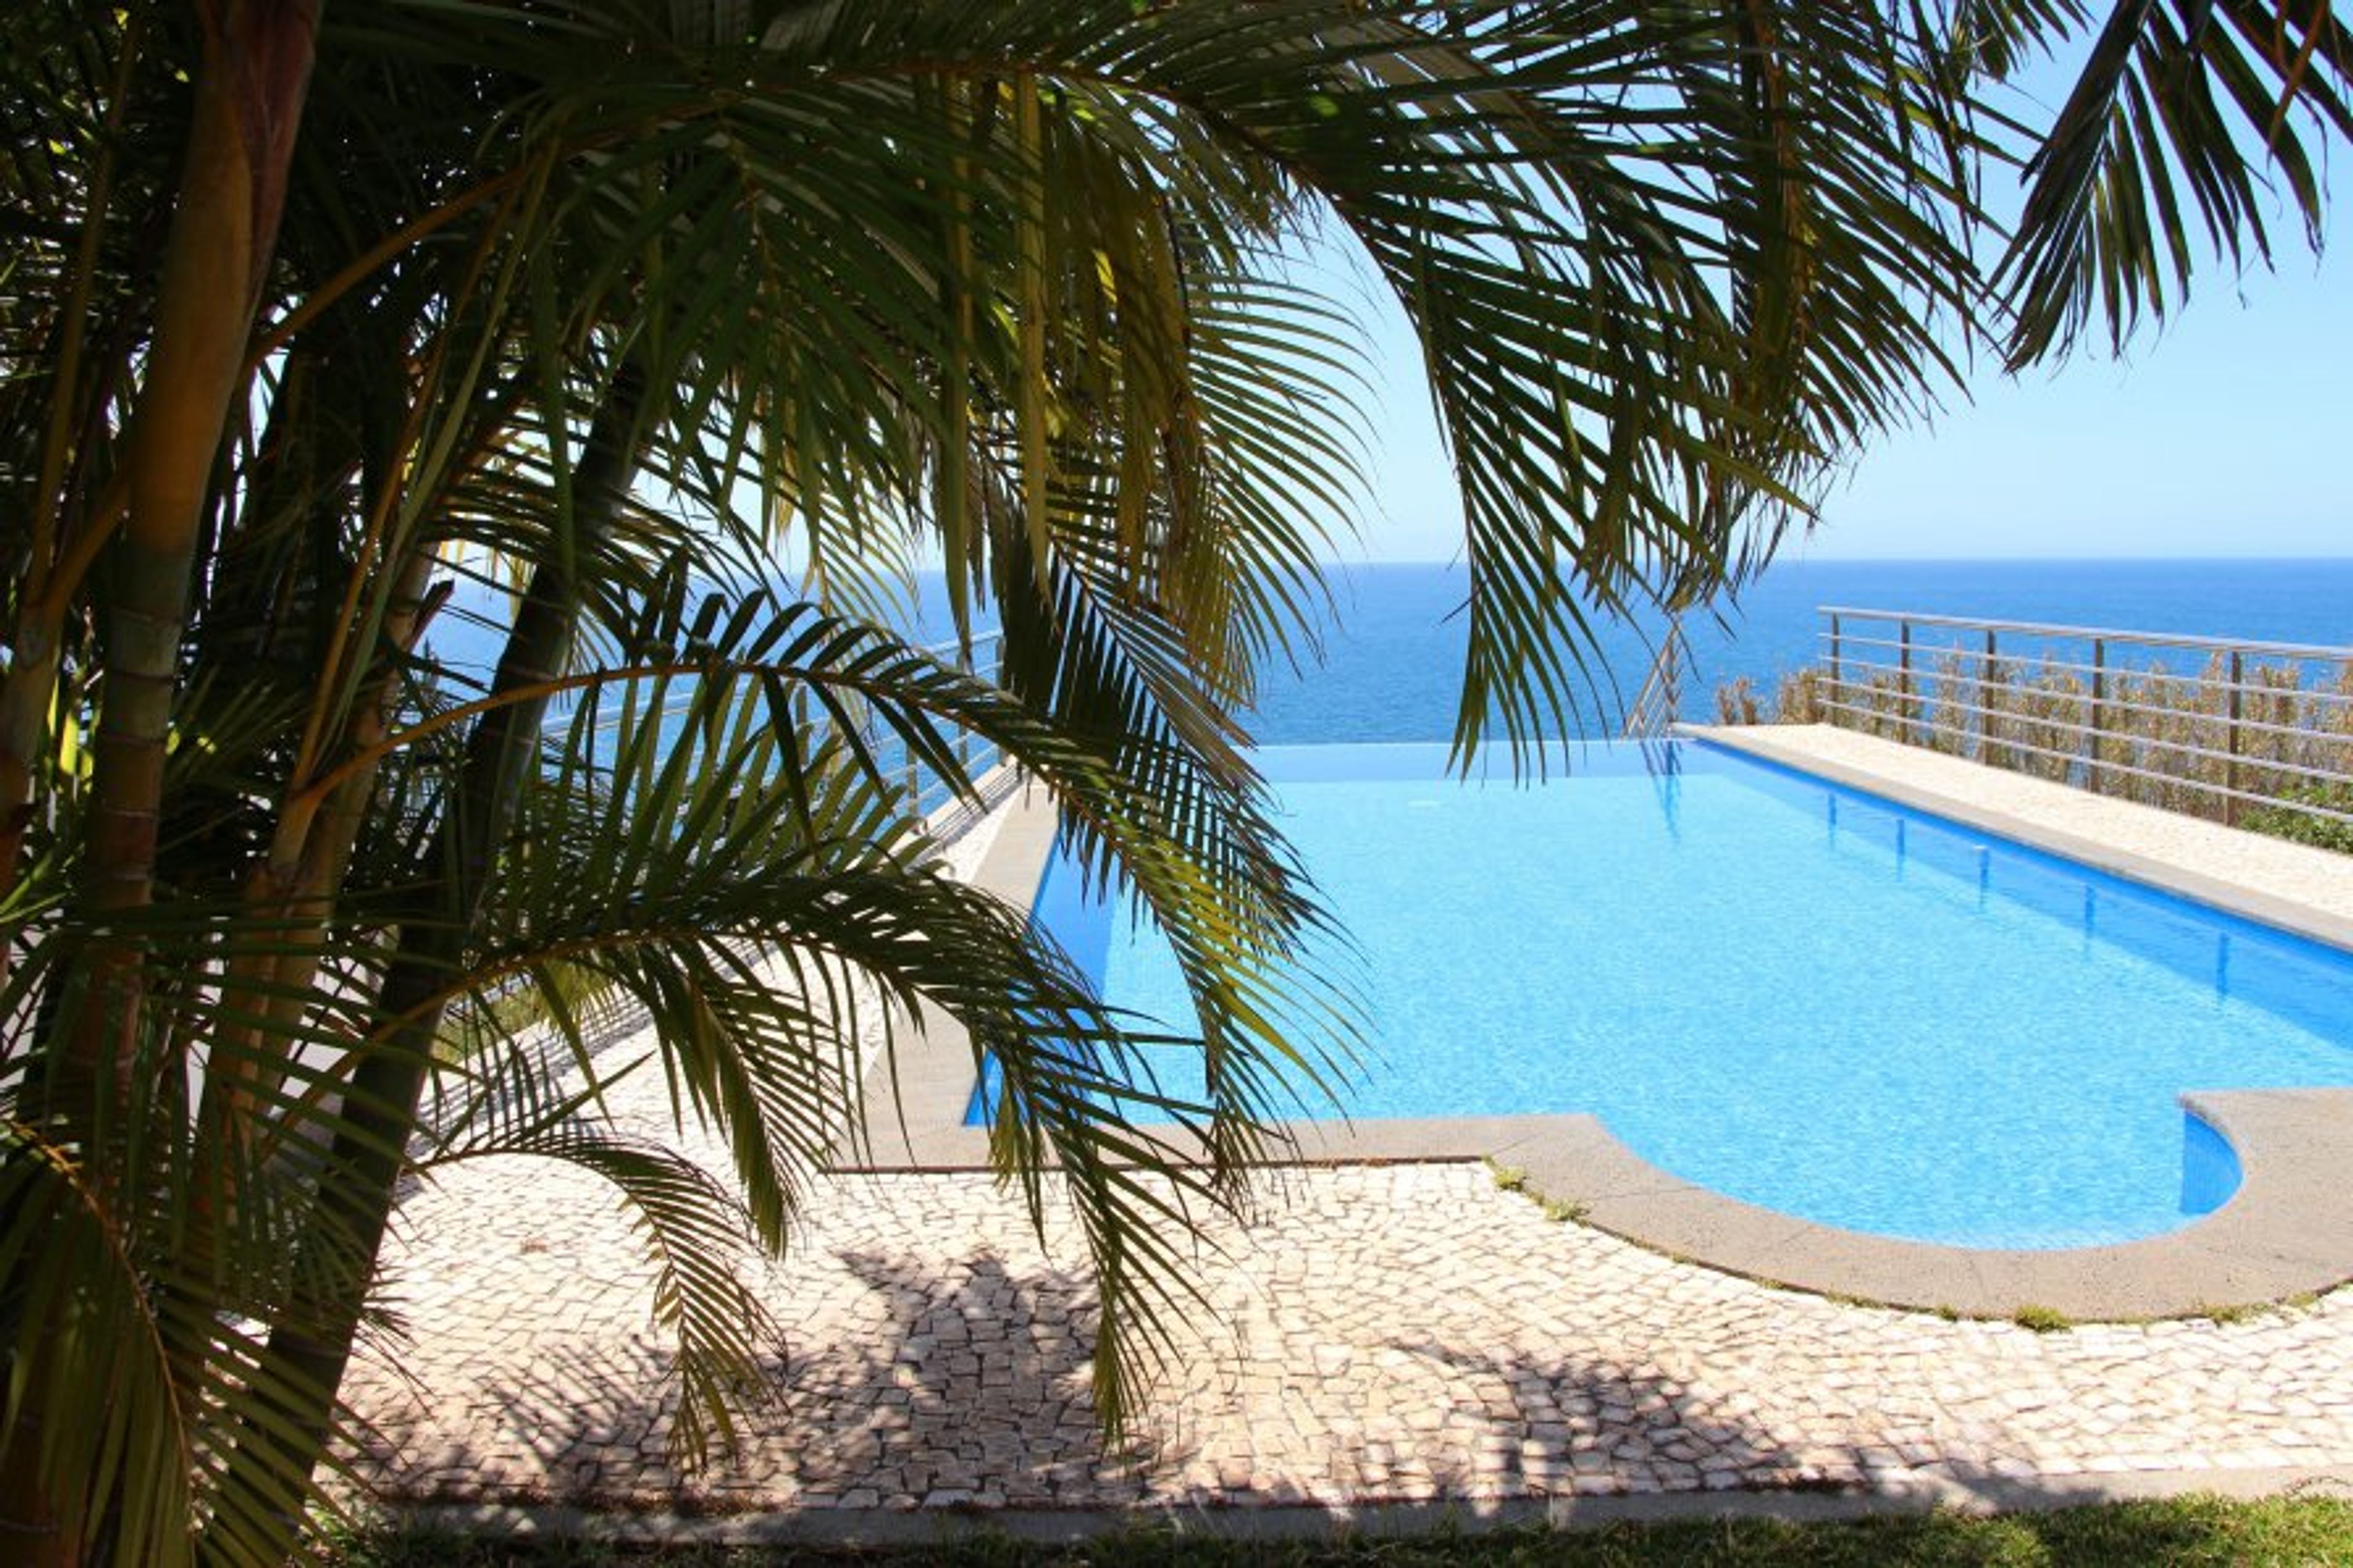 Swimming Pool with sea view and private.